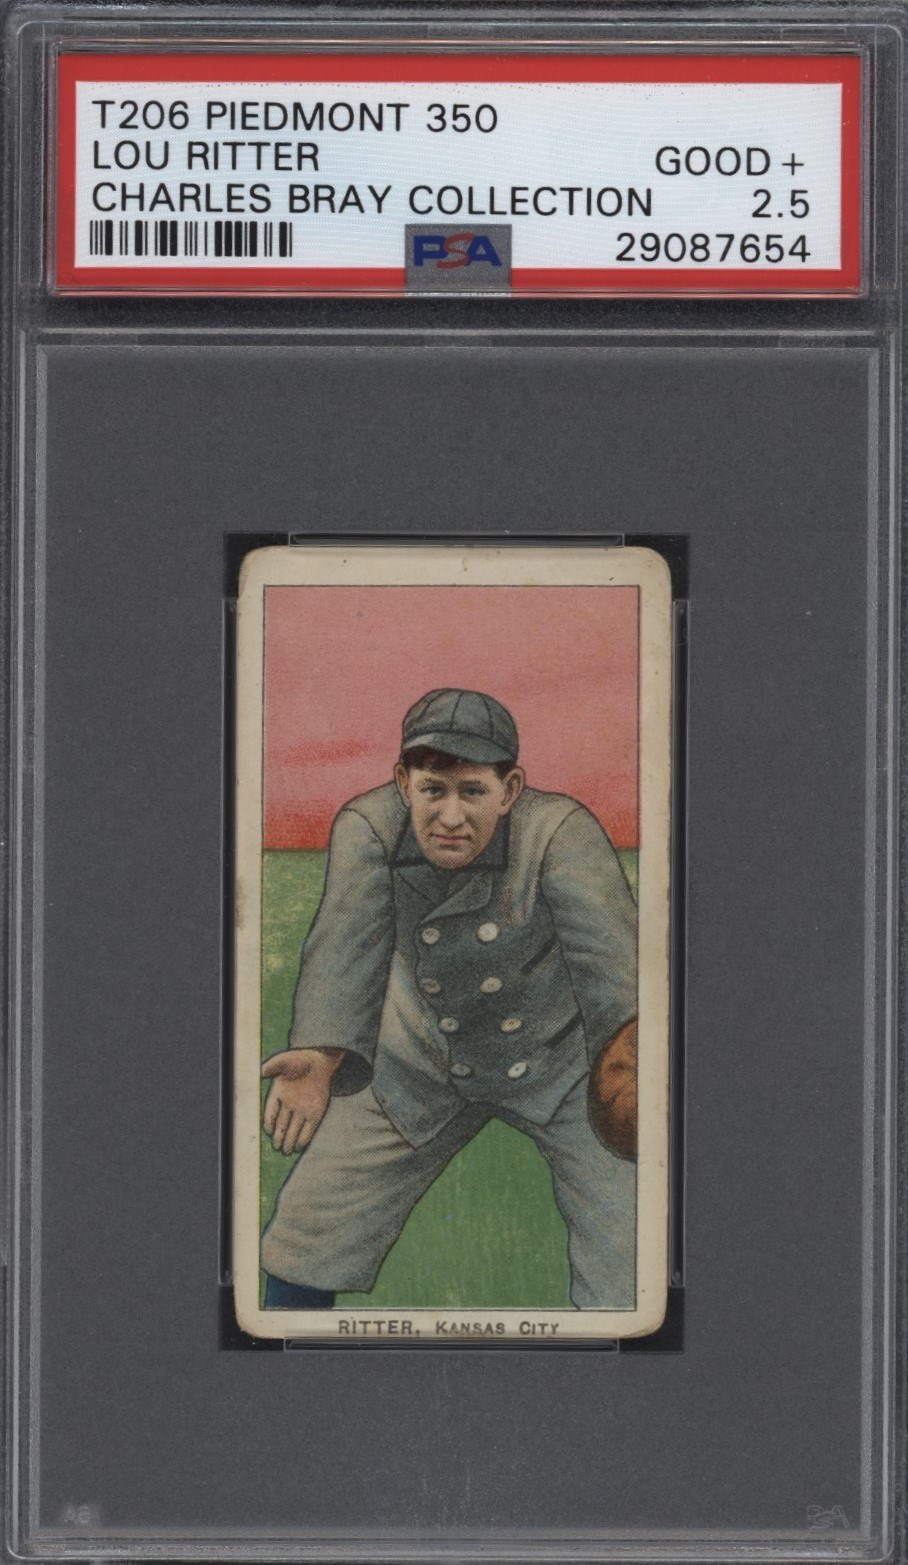 T206 Piedmont 350 Lou Ritter PSA 2.5 From the Charles Bray Collection